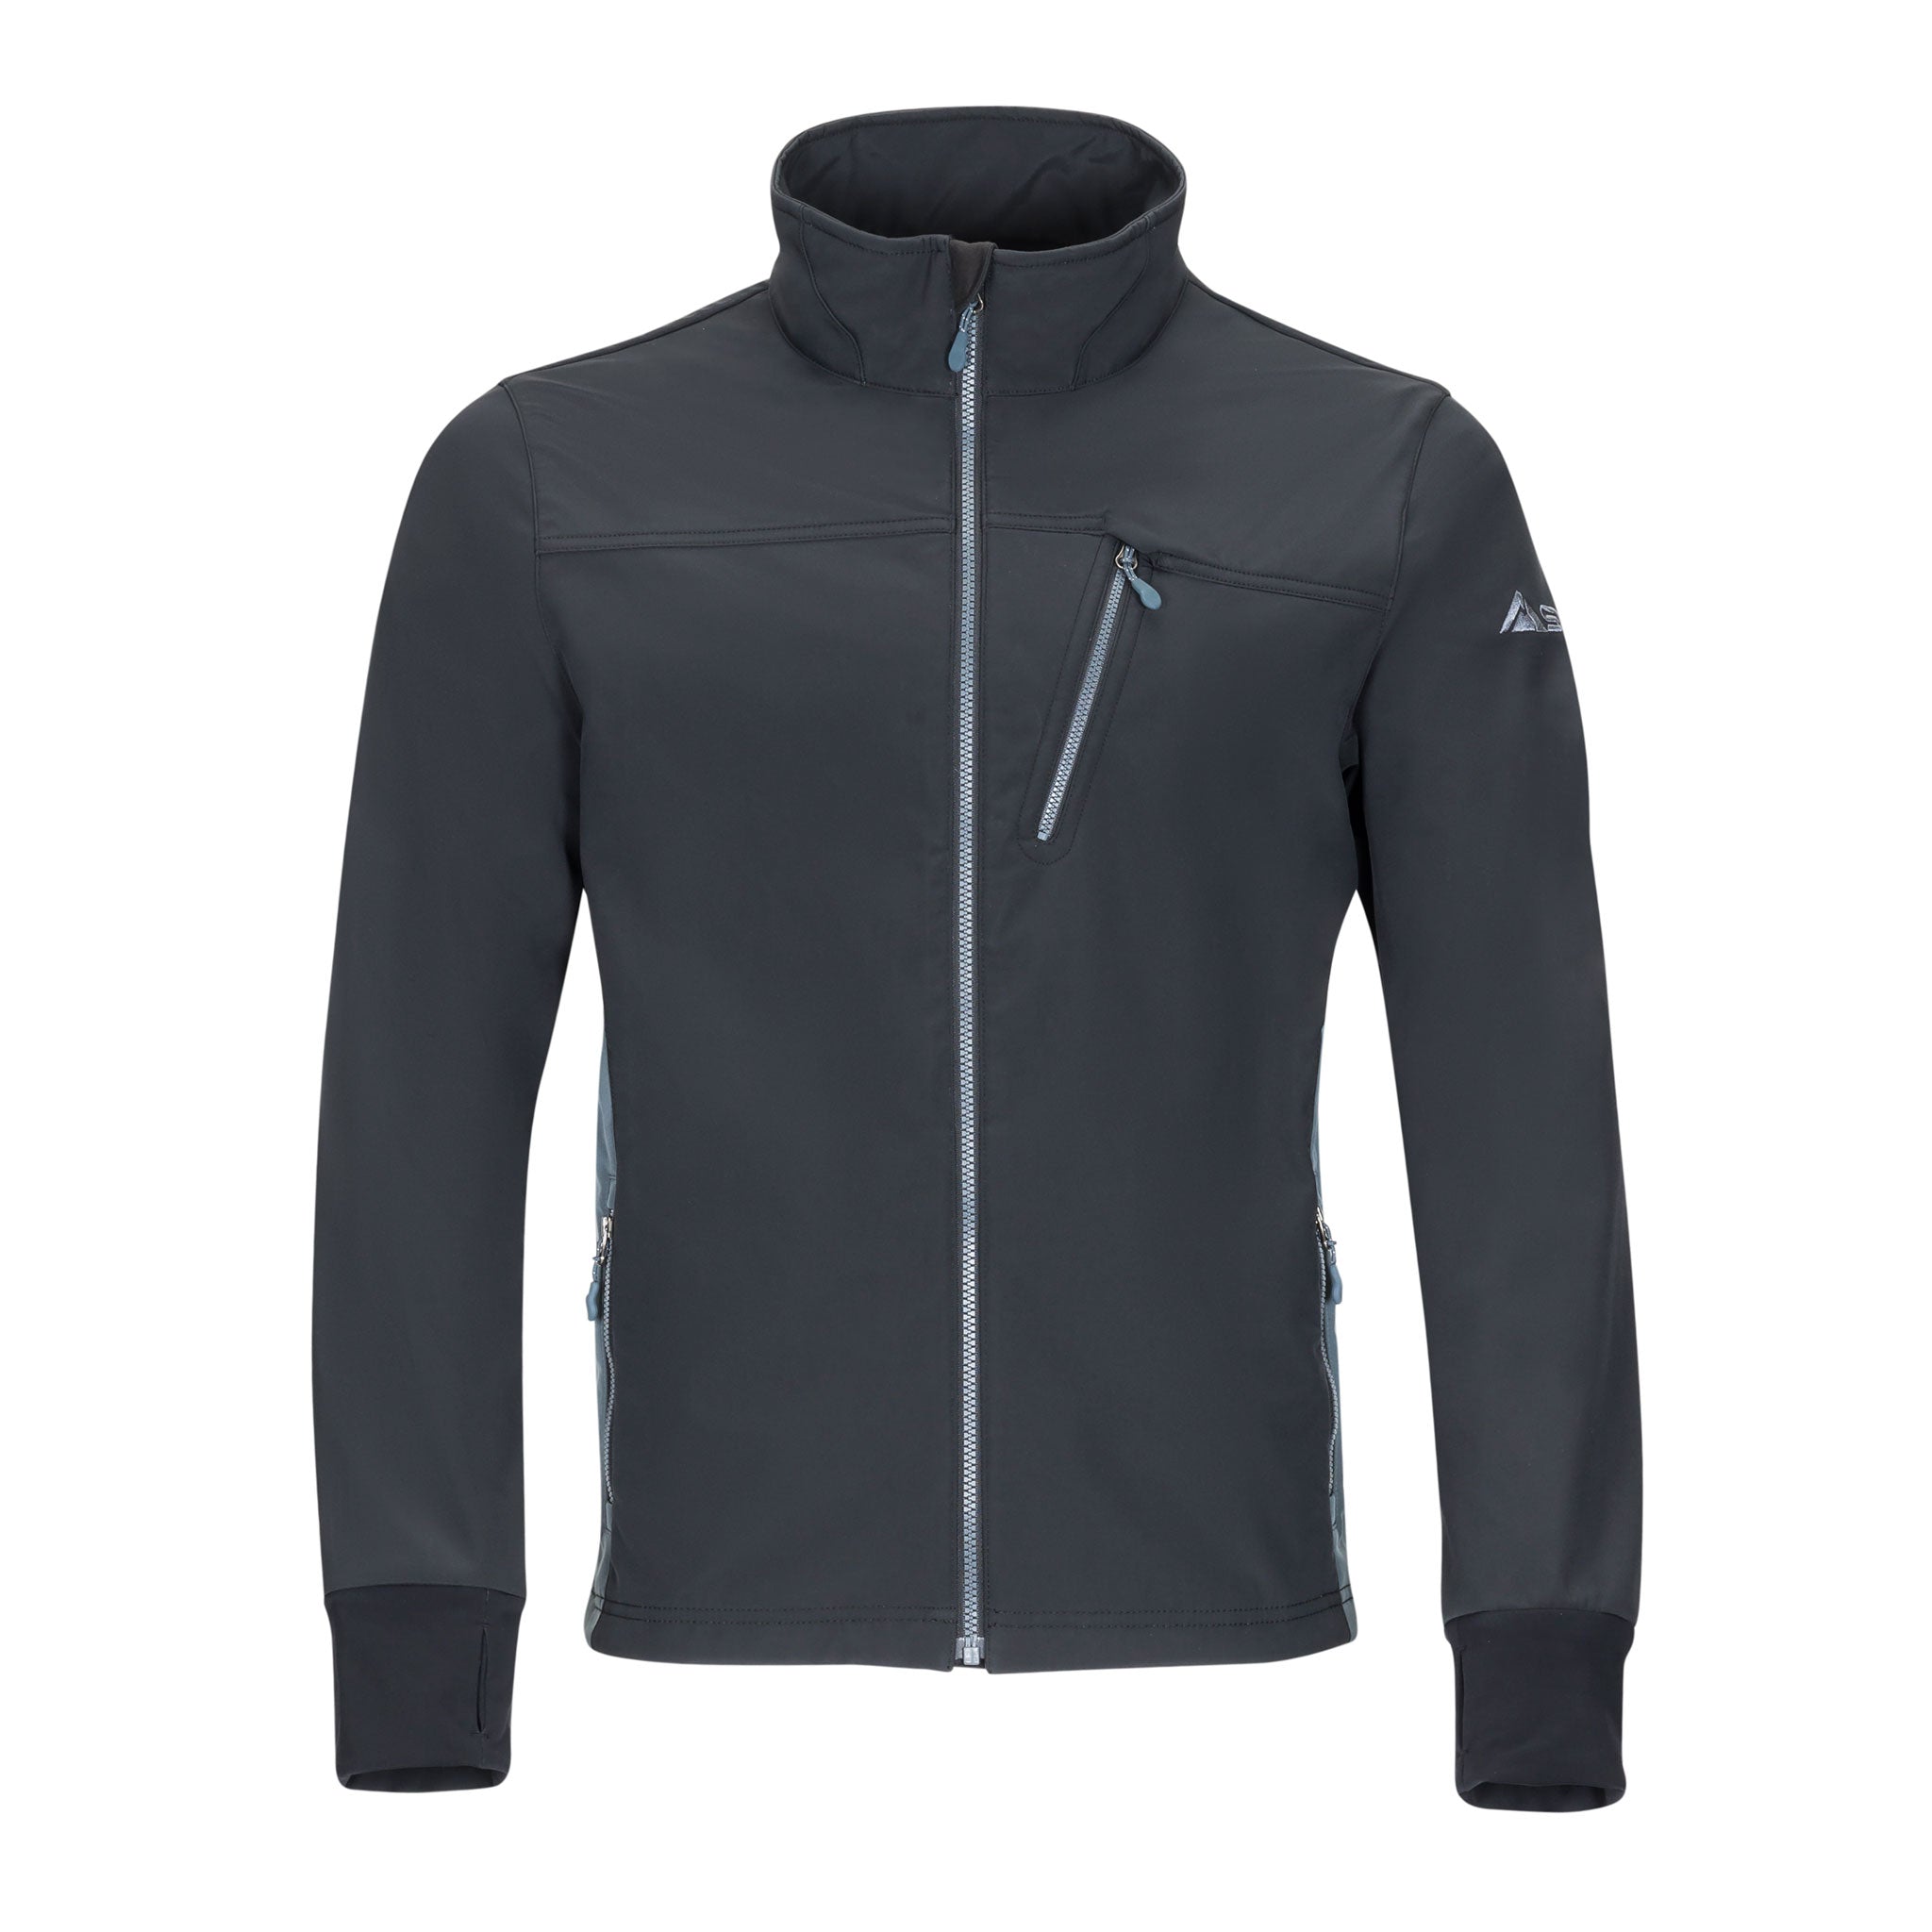 sync-performance-speed-jacket-black-front